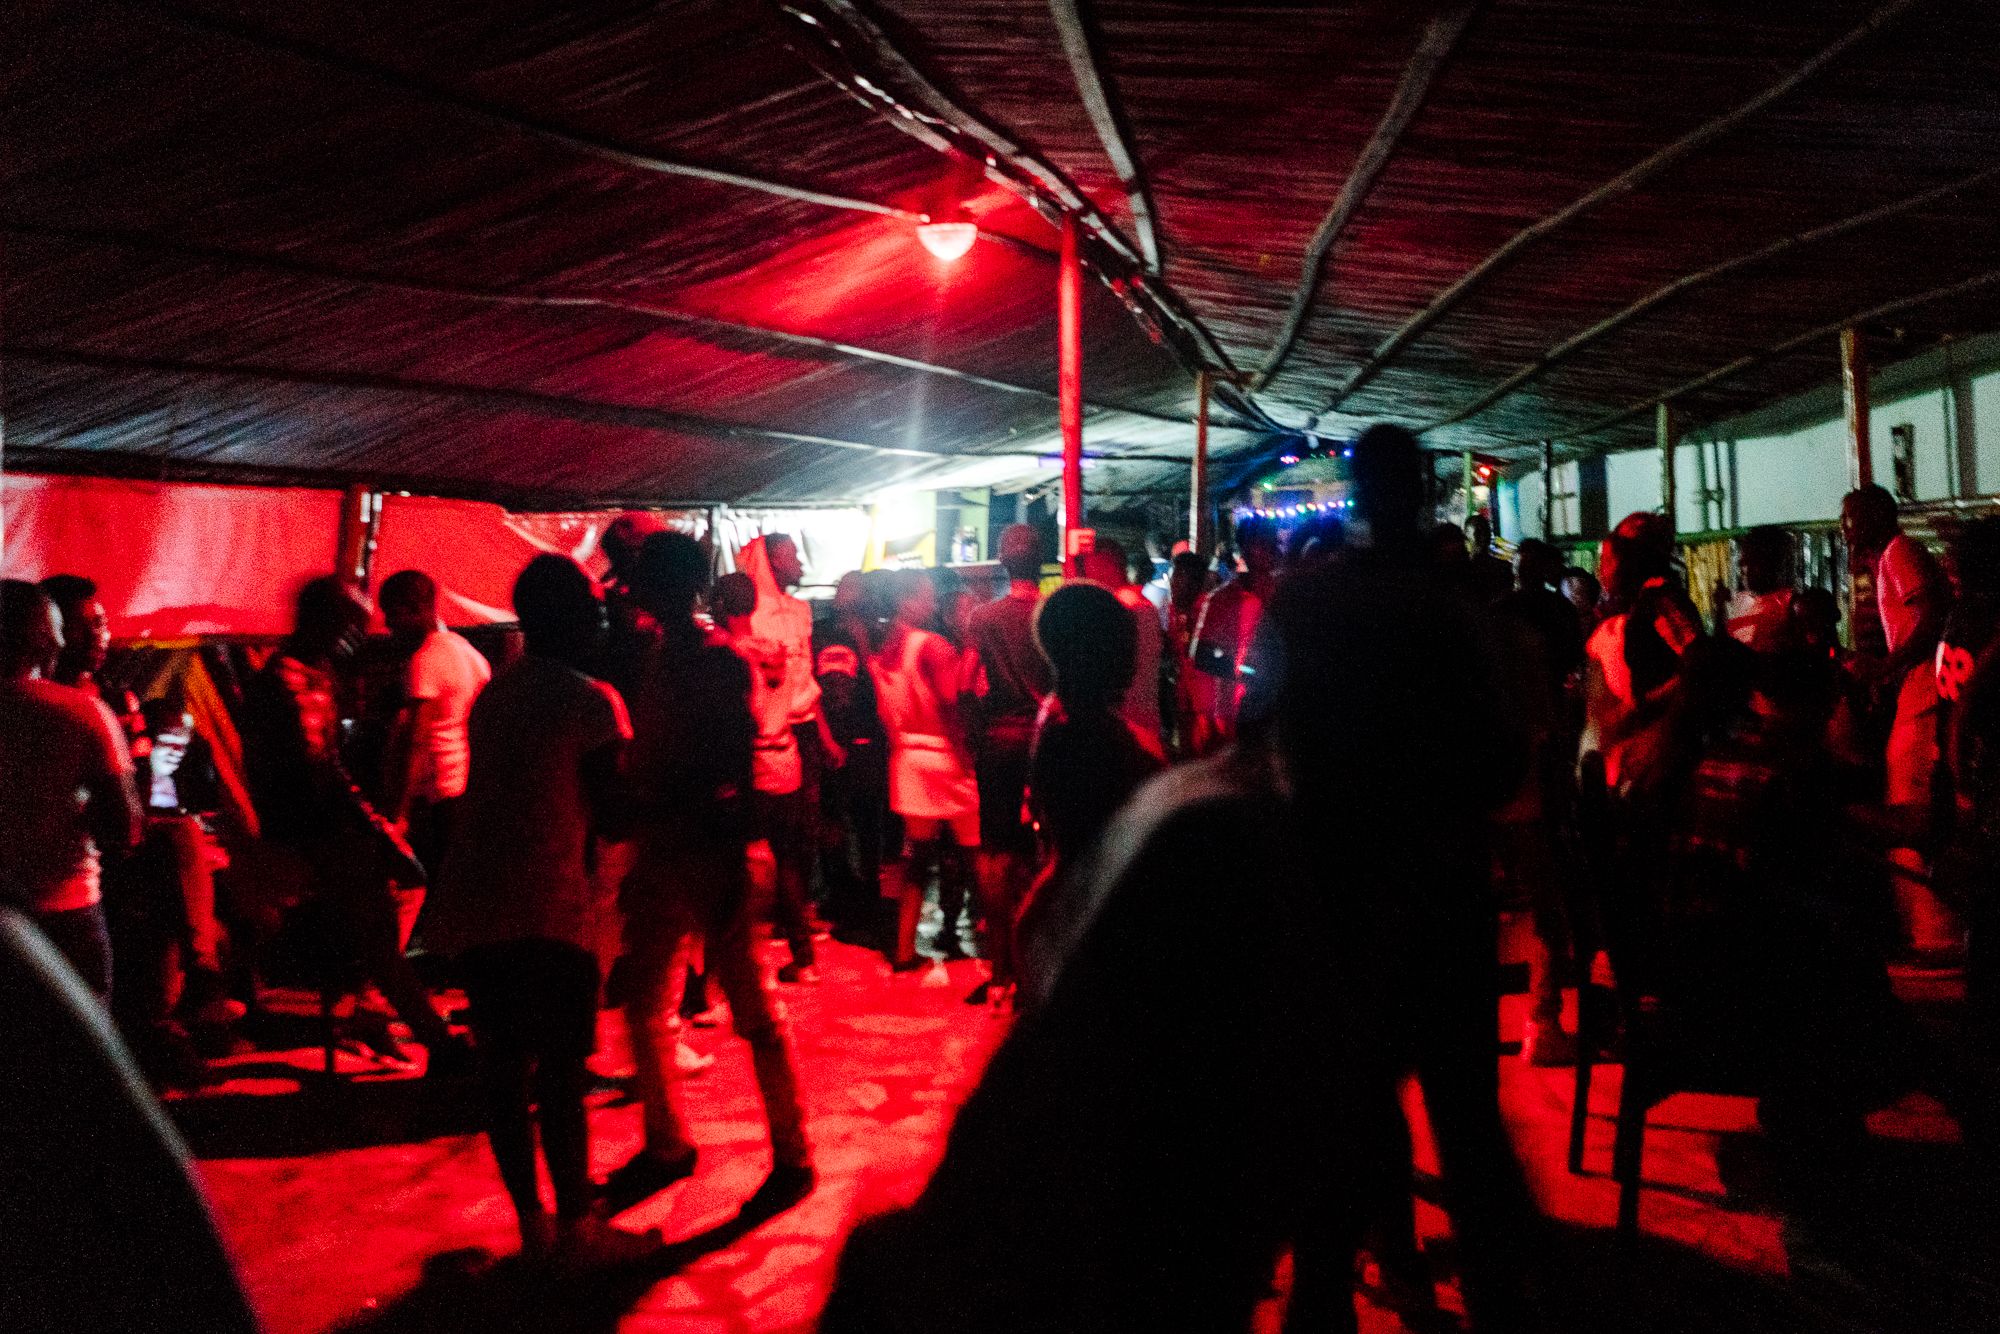 The dance floor at Ram, a bar in Kampala which hosted LGBTQ+ nights on Sundays and had become the de facto gay bar in the city. It closed a few months prior, leaving Kampala without a single dedicated bar for the LGBTQ+ community. Image by Jake Naughton. Uganda, 2017.